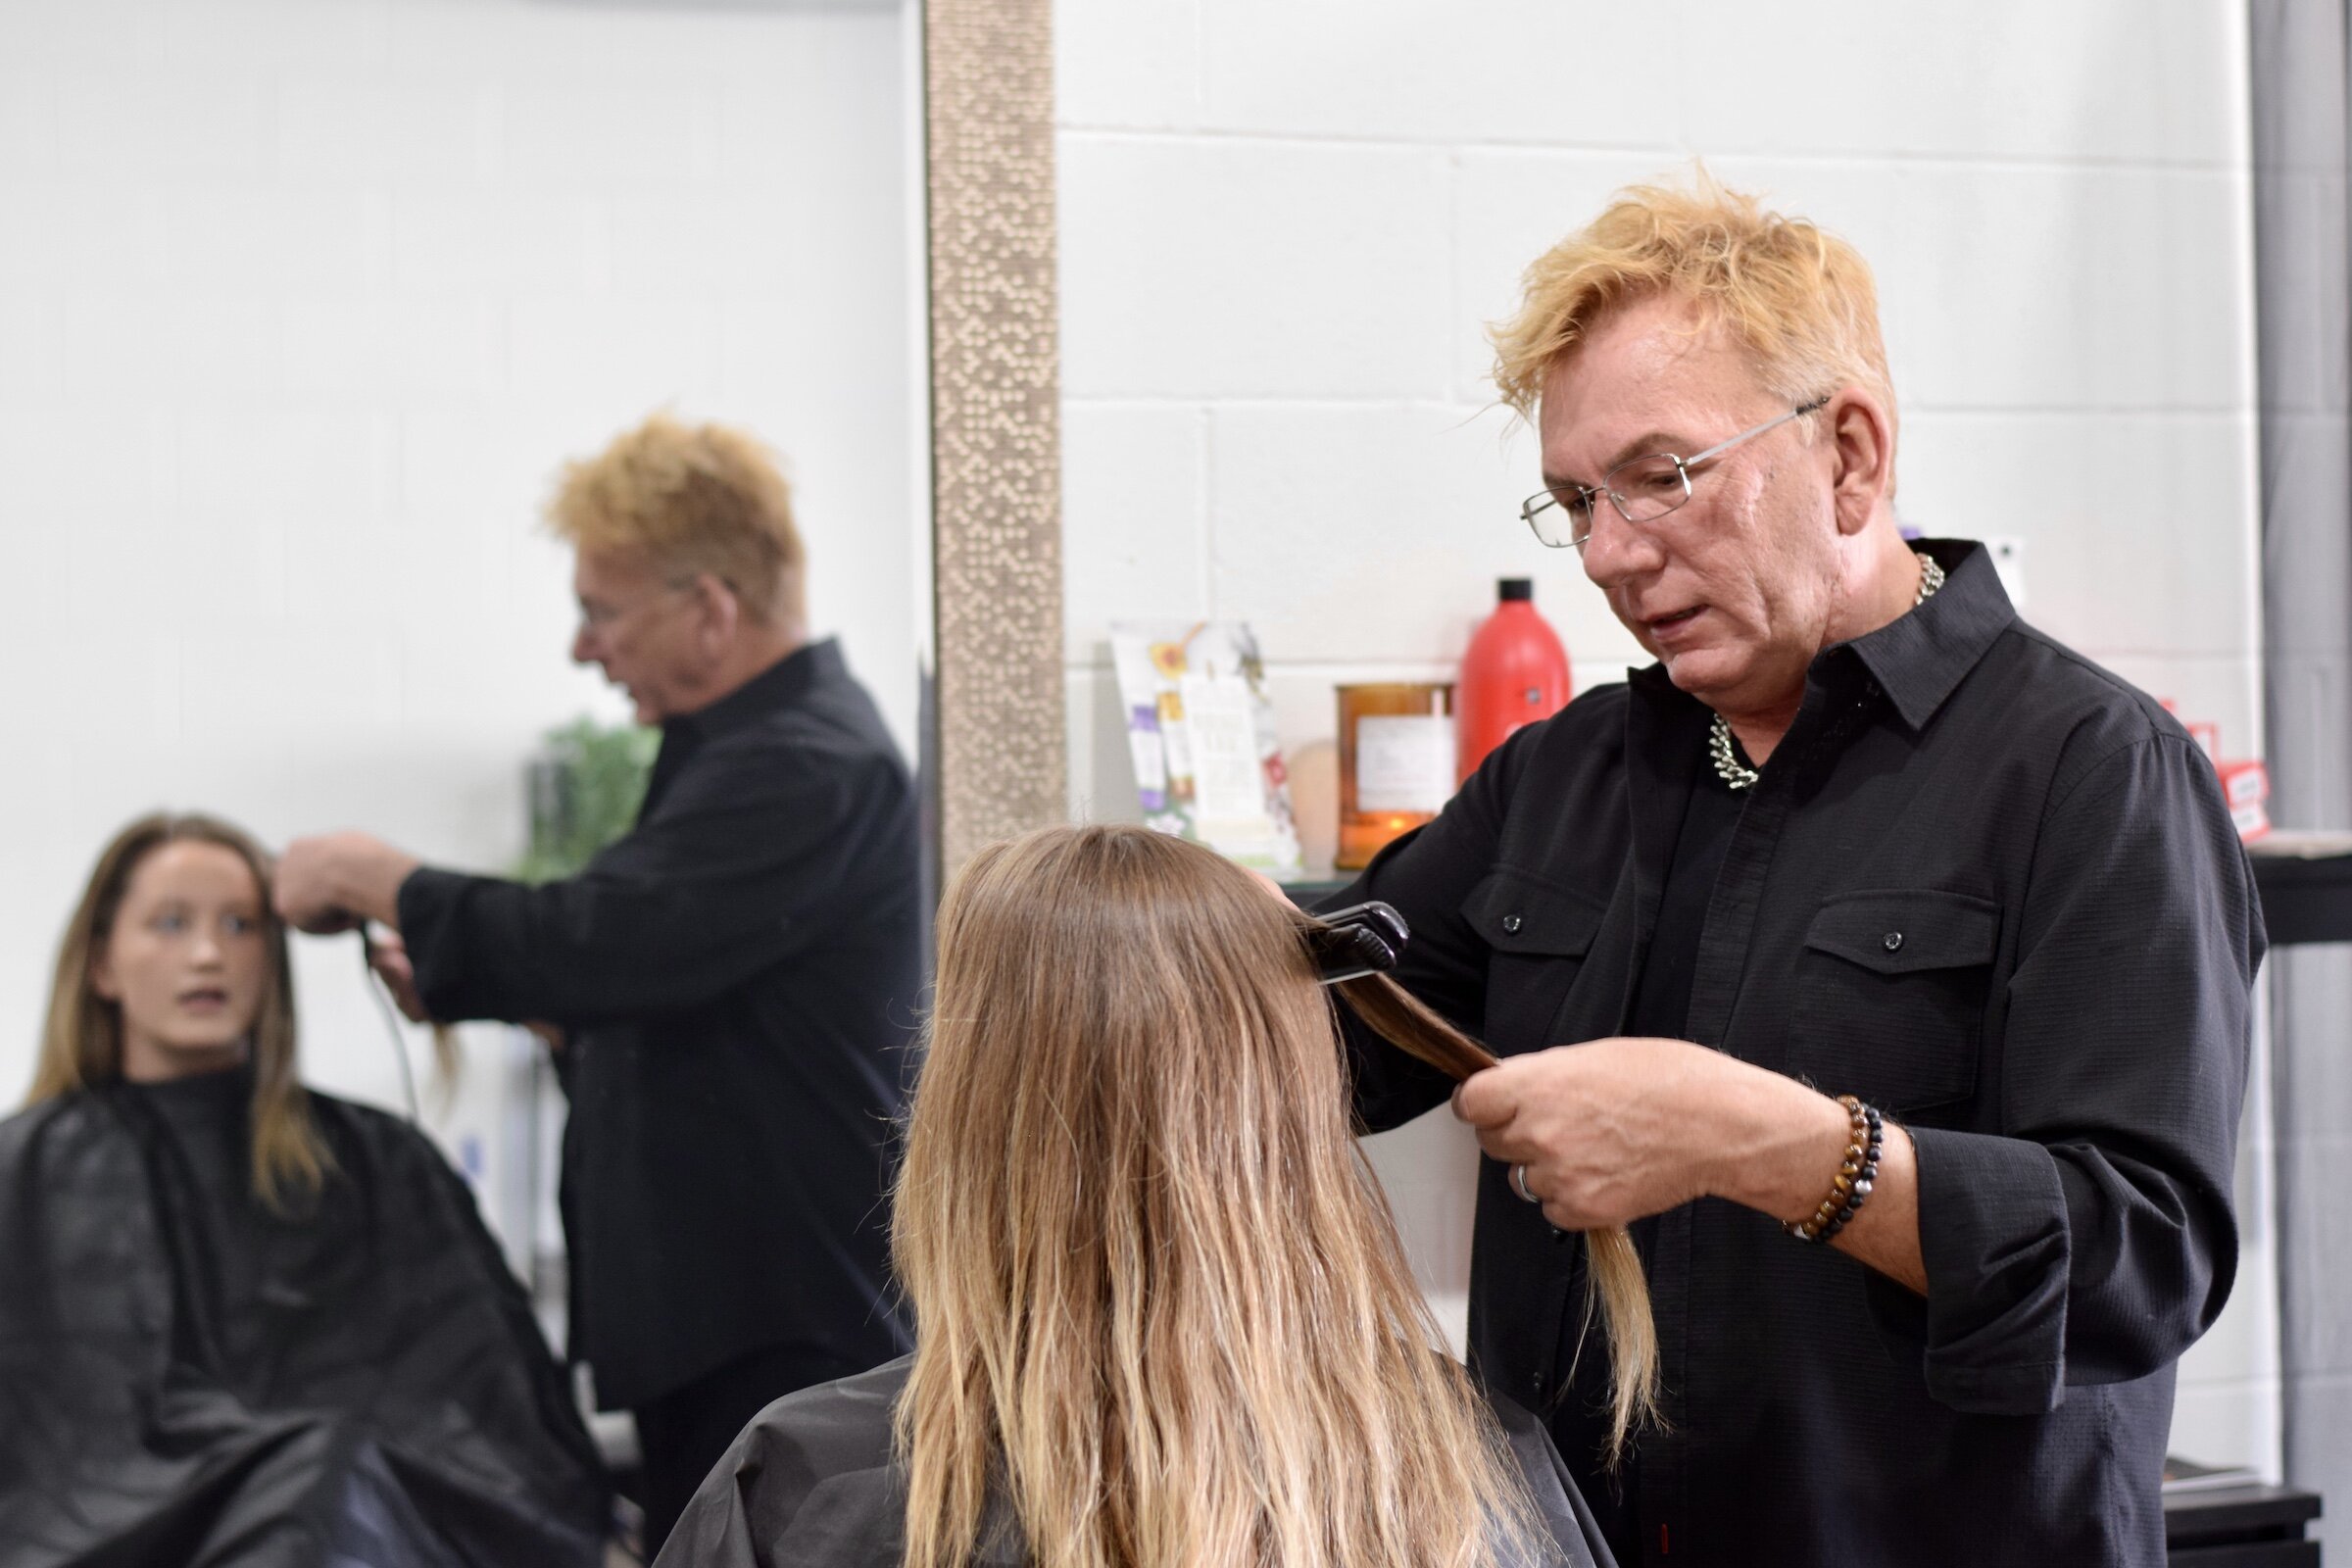 Michael Schram, owner of Michael Michael's Salon and Spa, styles a client's hair.